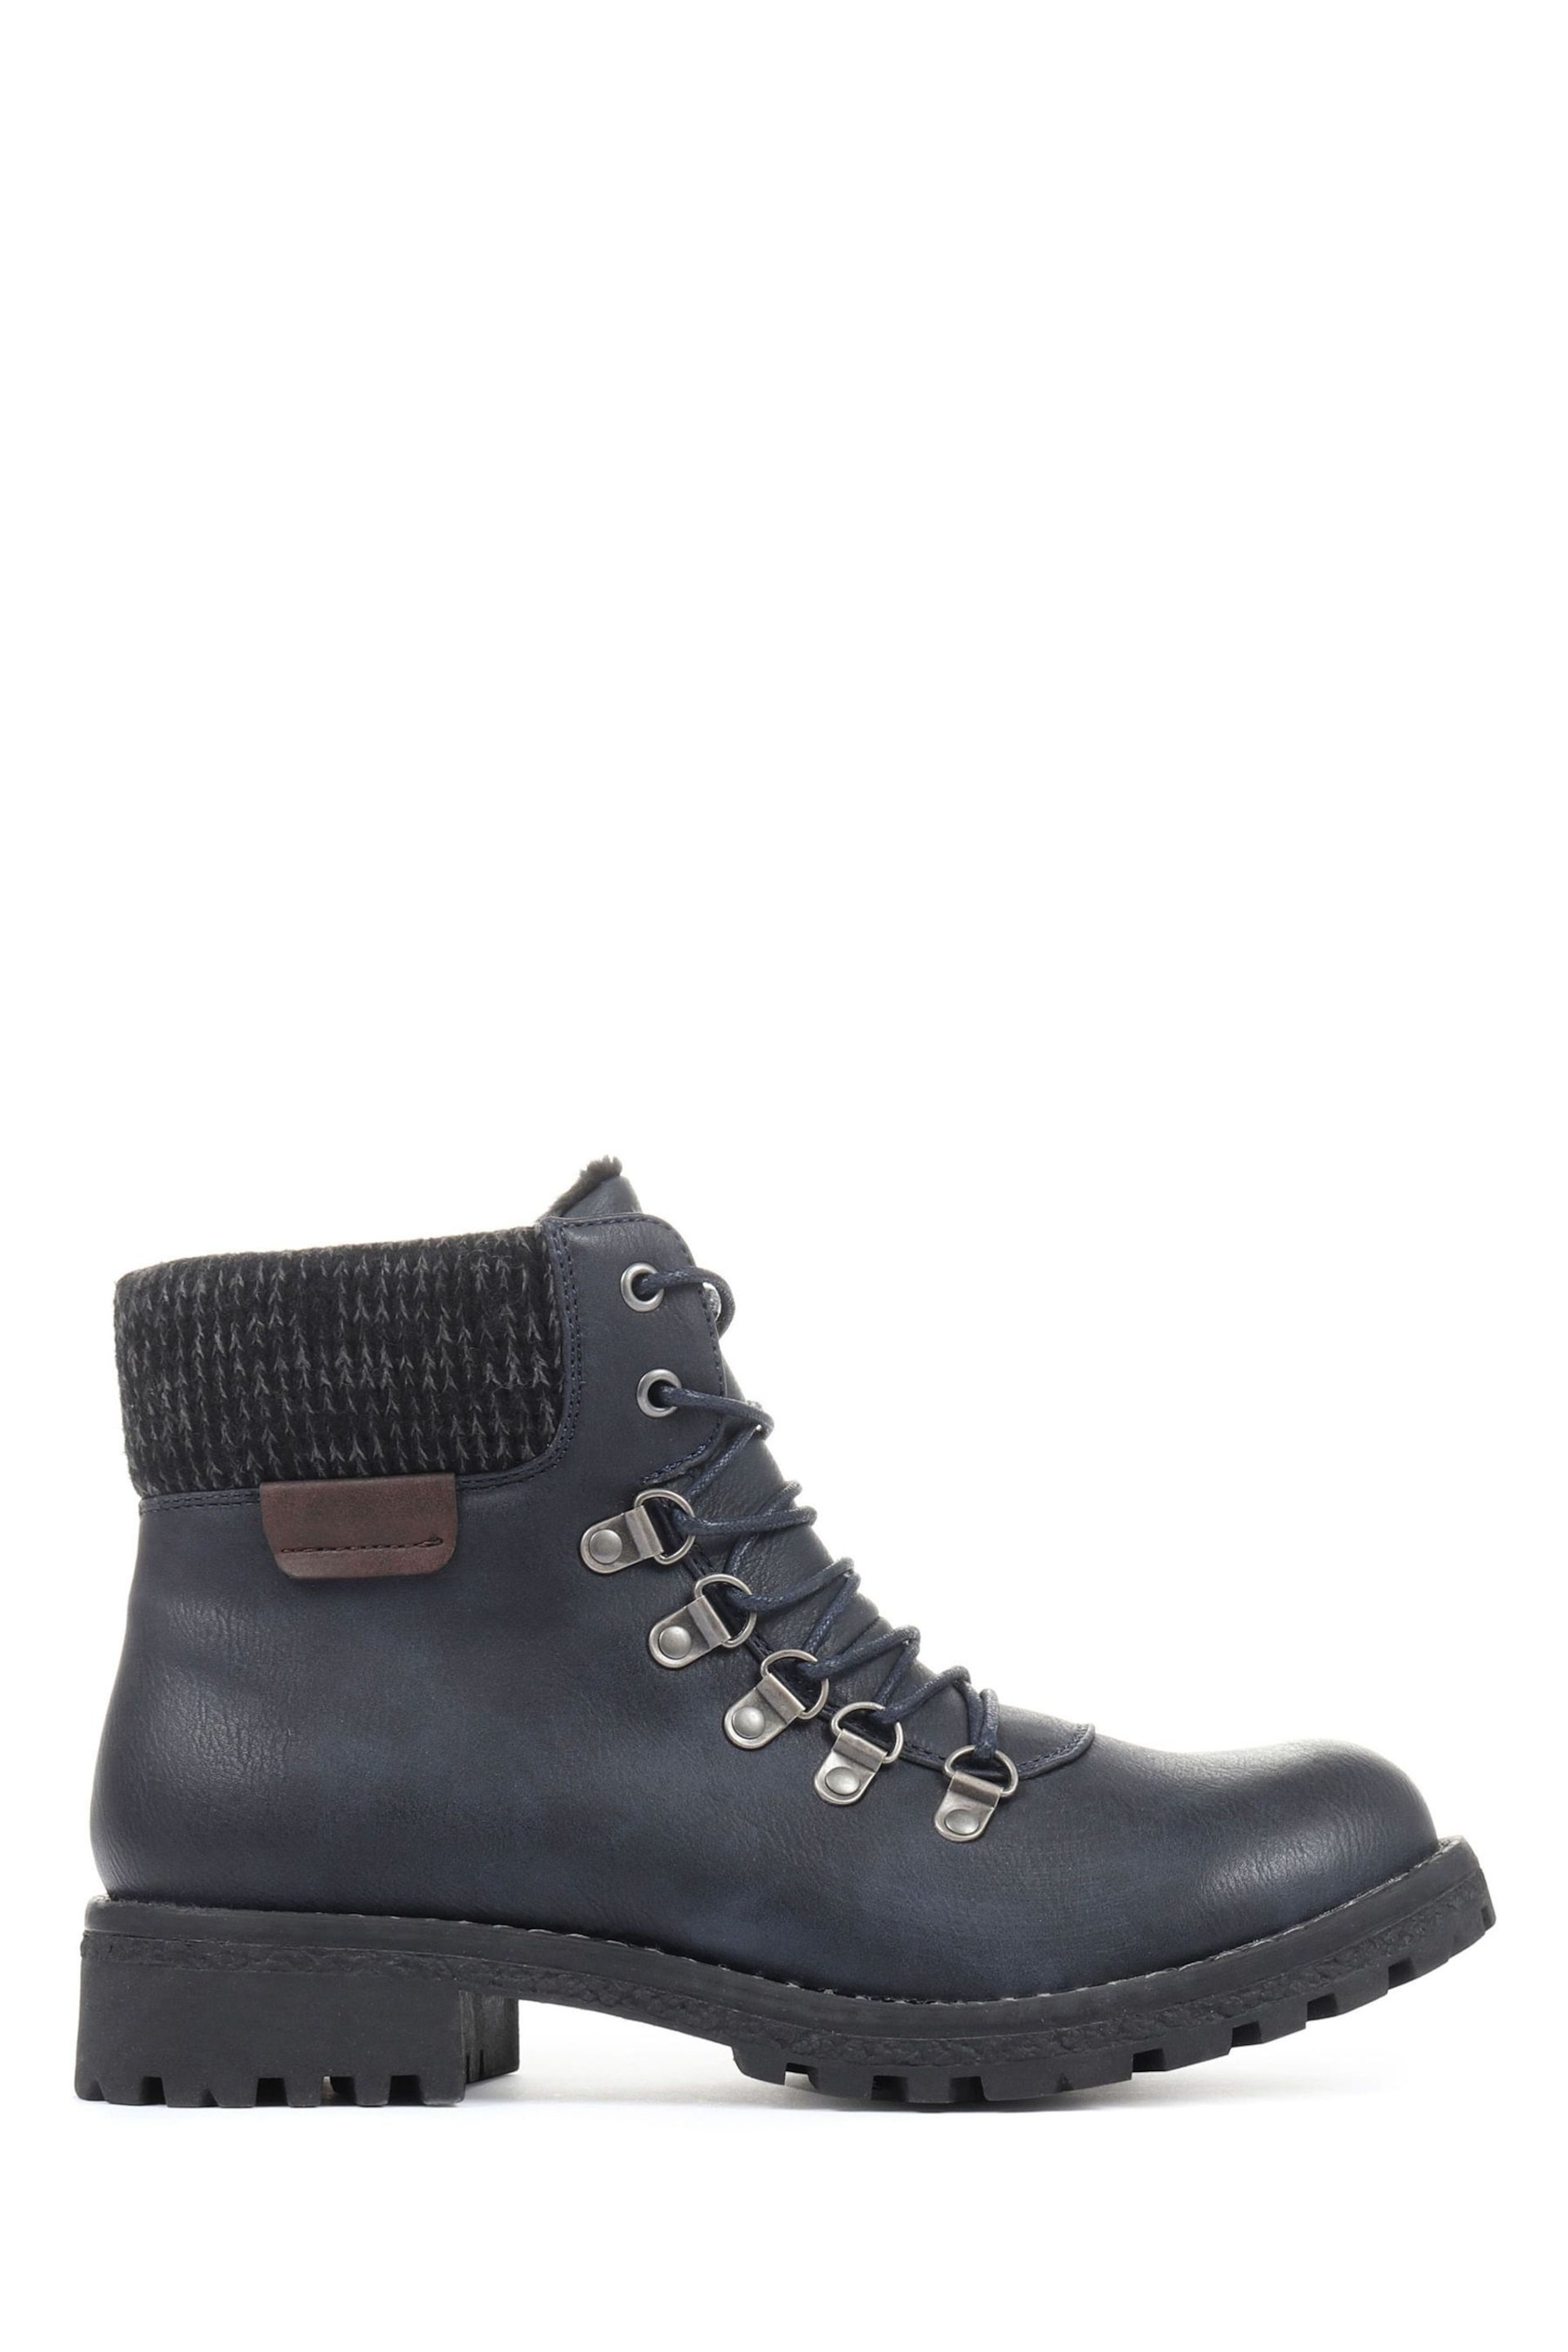 Pavers Ladies Lace-Up Ankle Boots - Image 1 of 5